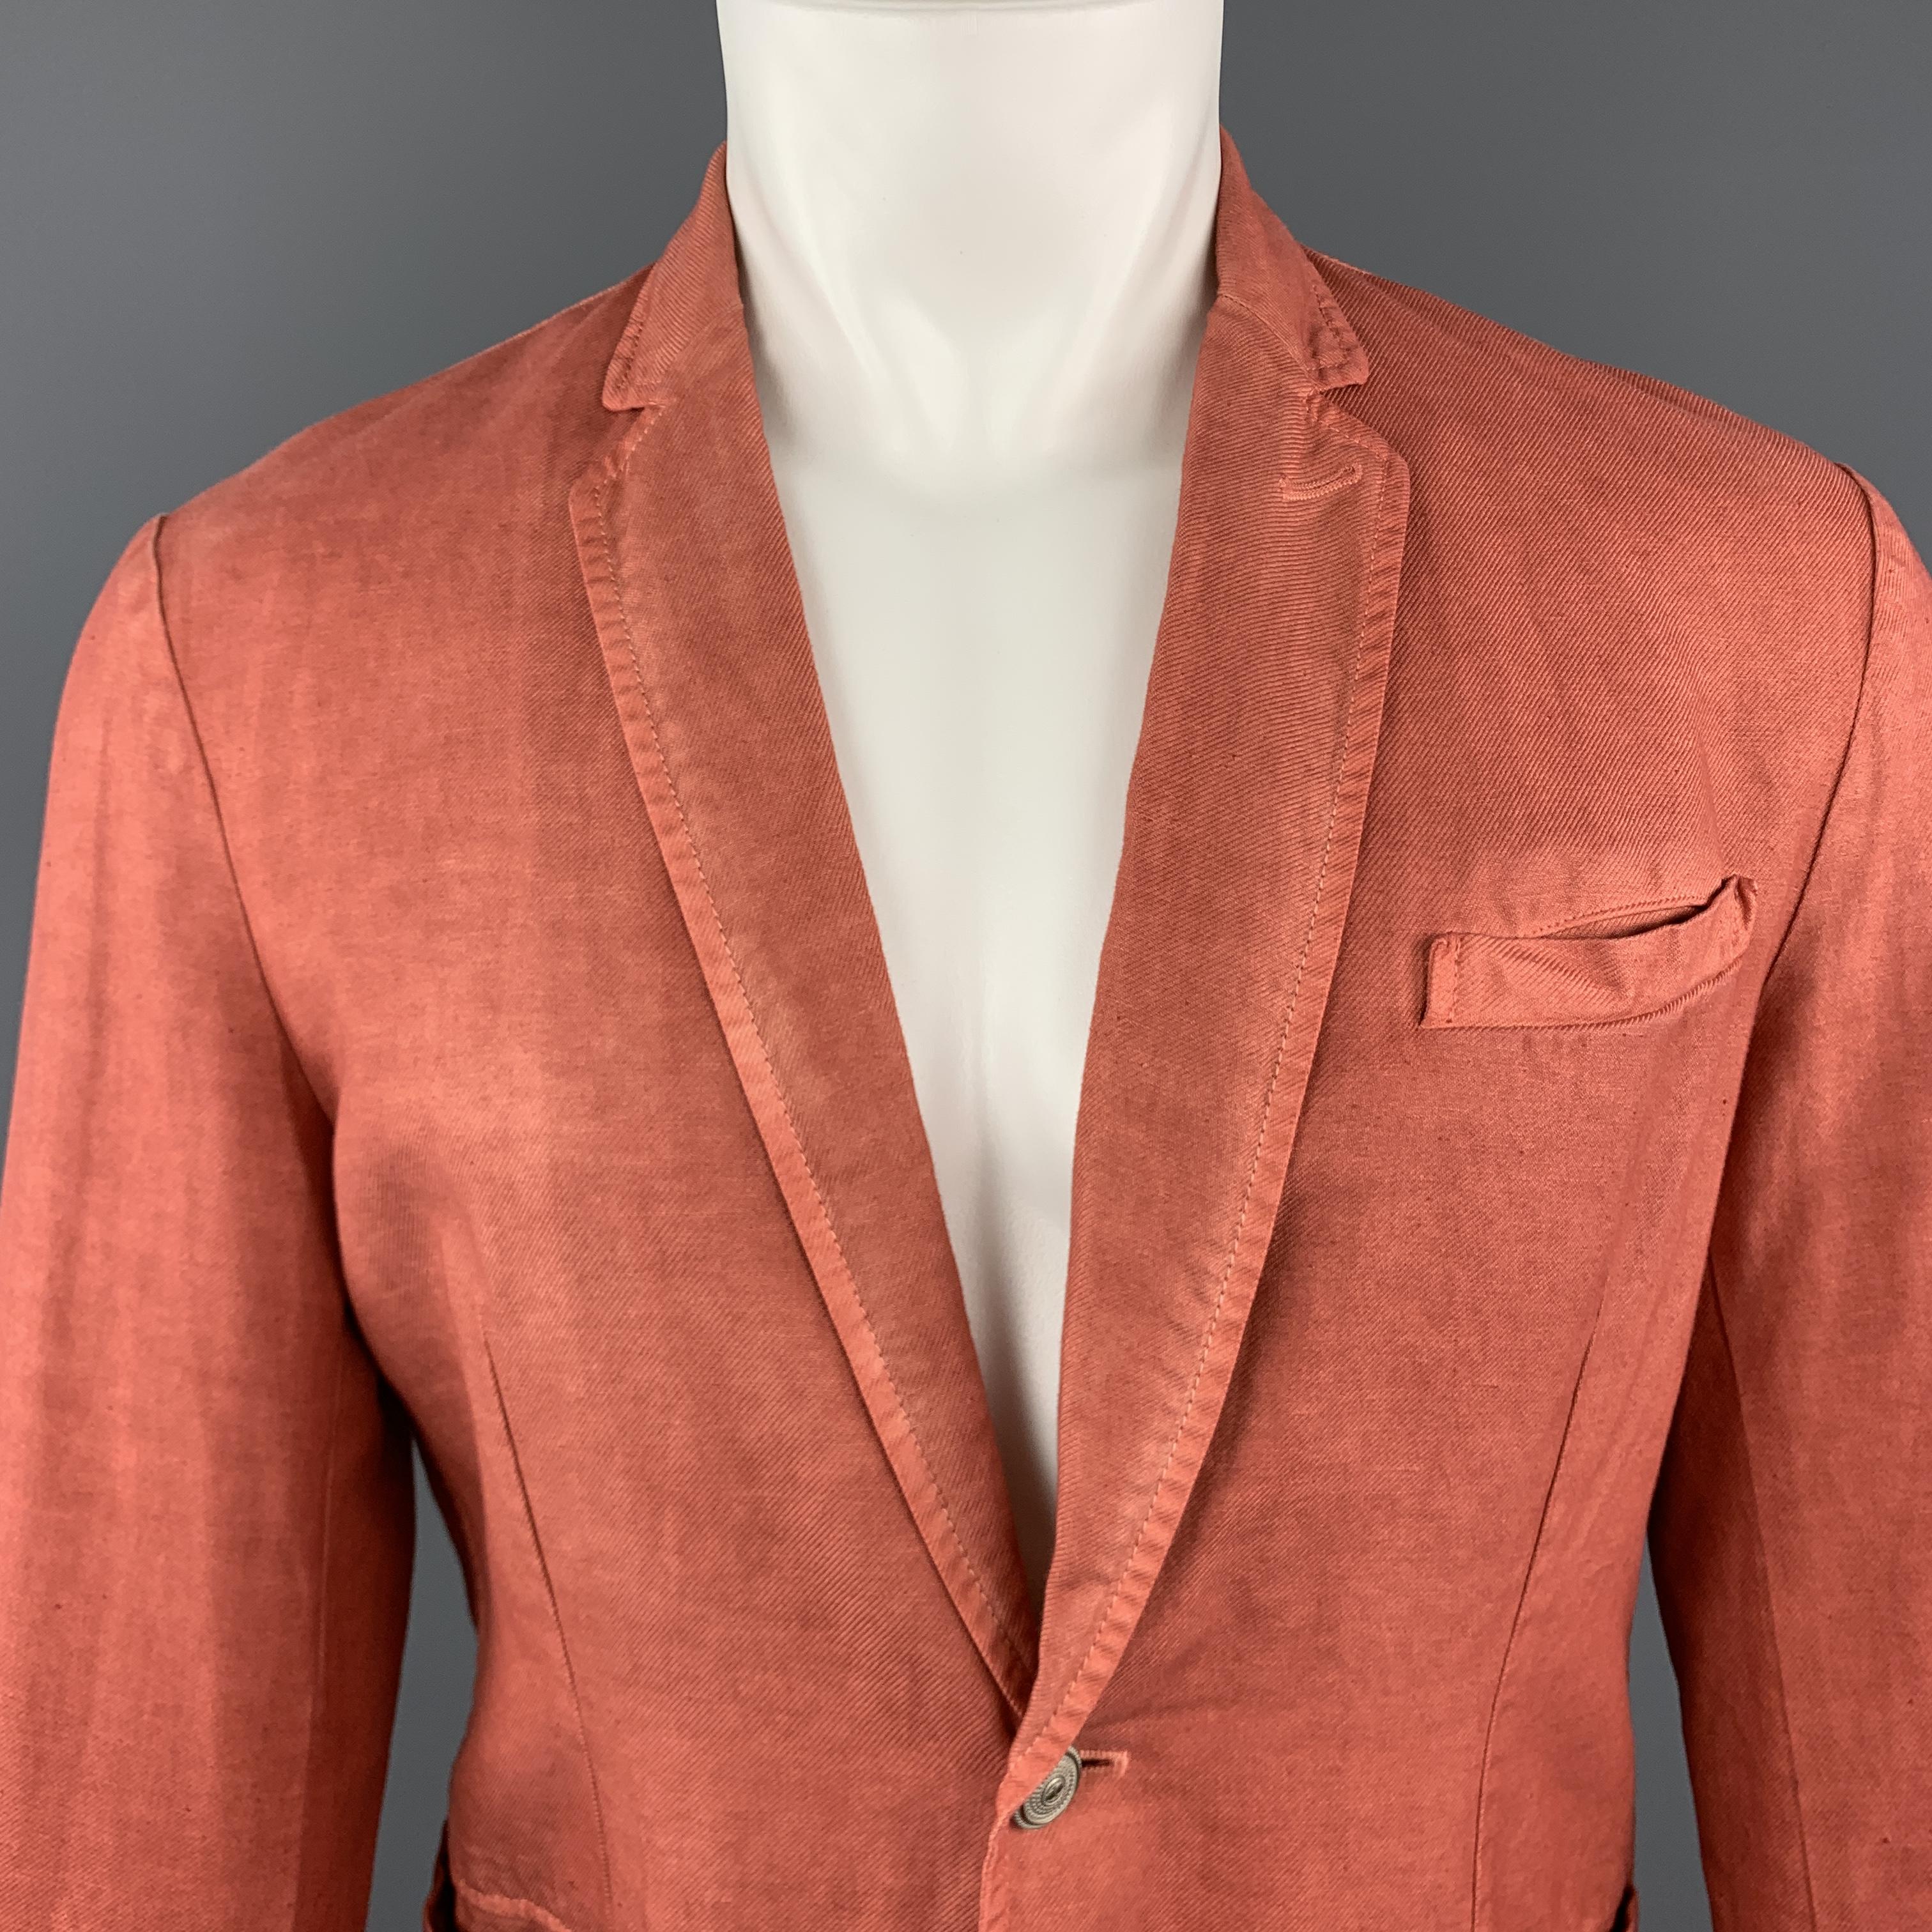 JUST CAVALLI by ROBERTO CAVALLI sport coat comes in washed brick red cotton linen blend textured twill with a notch lapel, single breasted, two button front, and silver tone metal buttons. Made in Italy.

Excellent Pre-Owned Condition.
Marked: IT